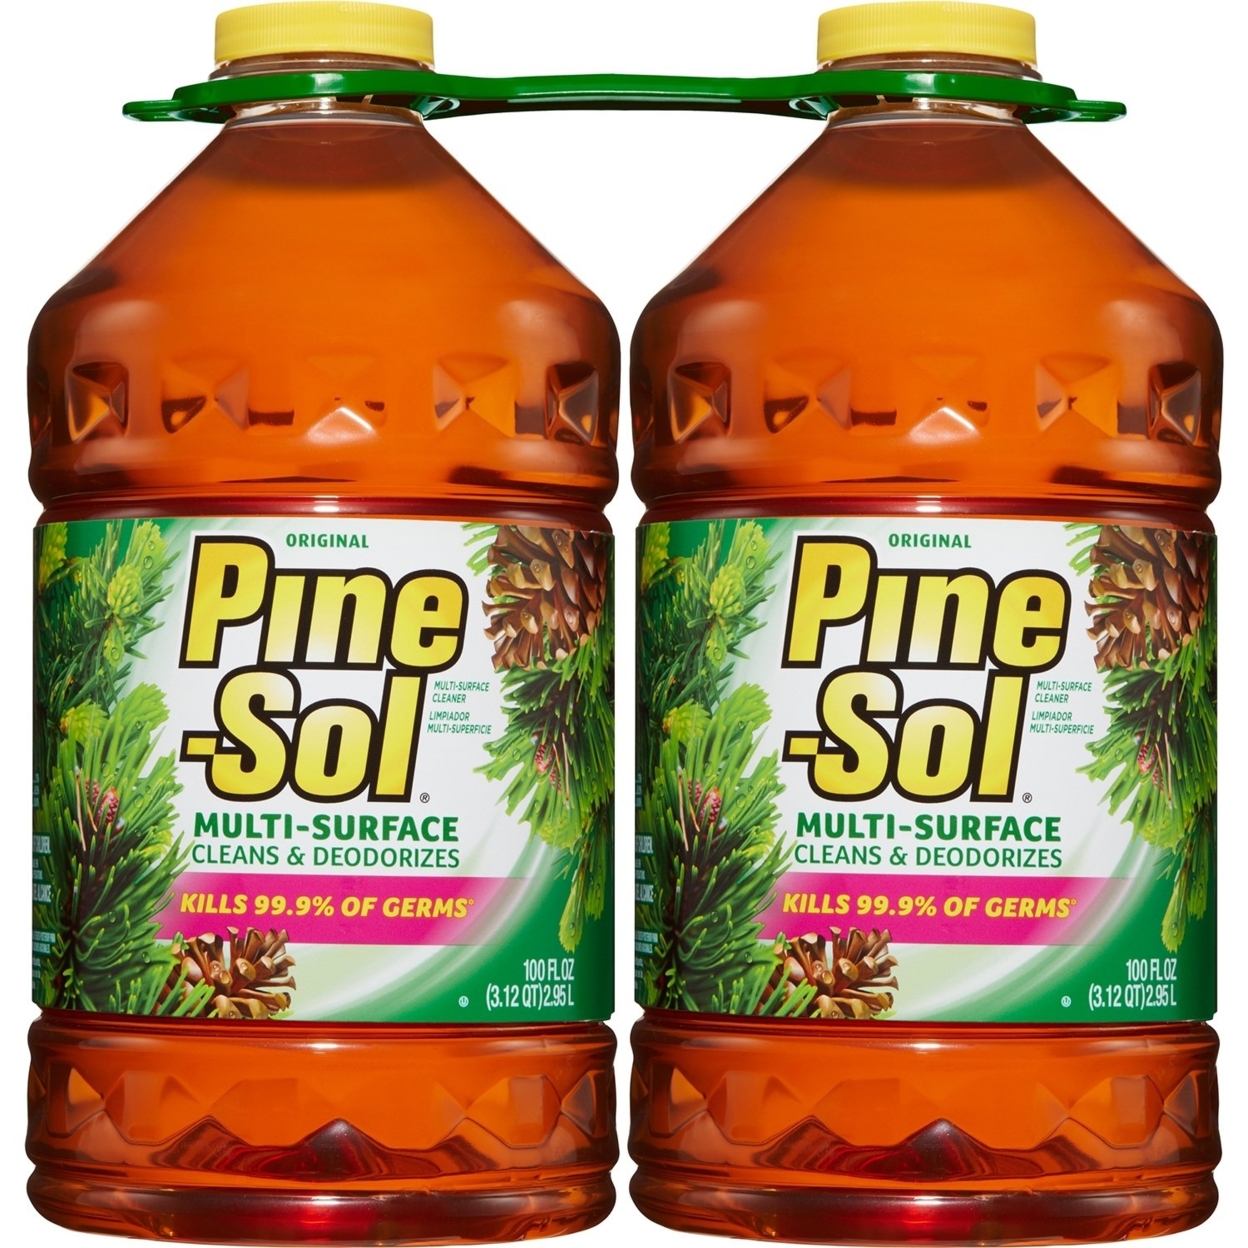 Pine-Sol Multi-Surface Disinfectant, Pine Scent (2 Pack, 100 Ounce)